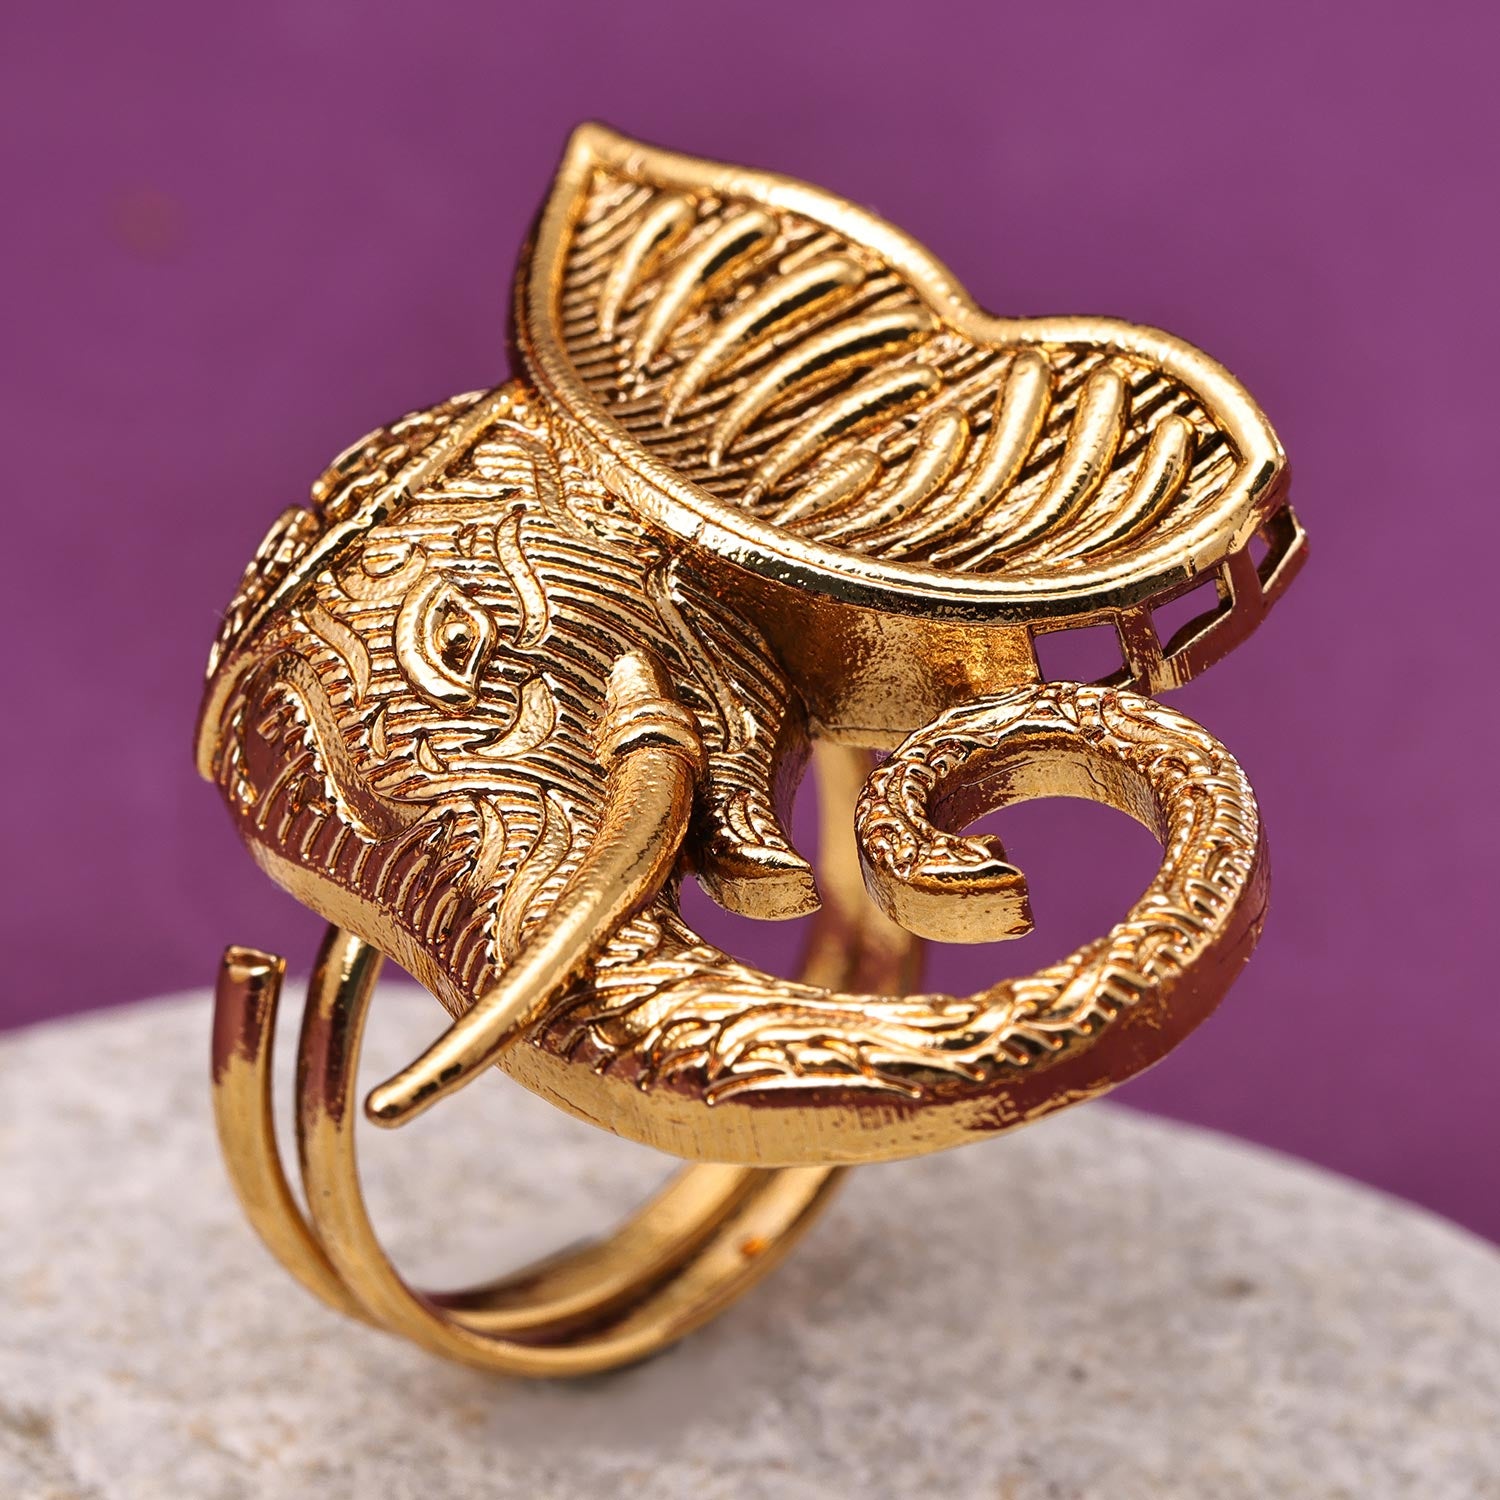 Buy 14K Solid Gold Elephant Ring, 925 Sterling Silver Elephant Ring,  Minimalist Ring, Stackable Ring, Mother's Day Gift, Valentine's Day Gift  Online in India - Etsy